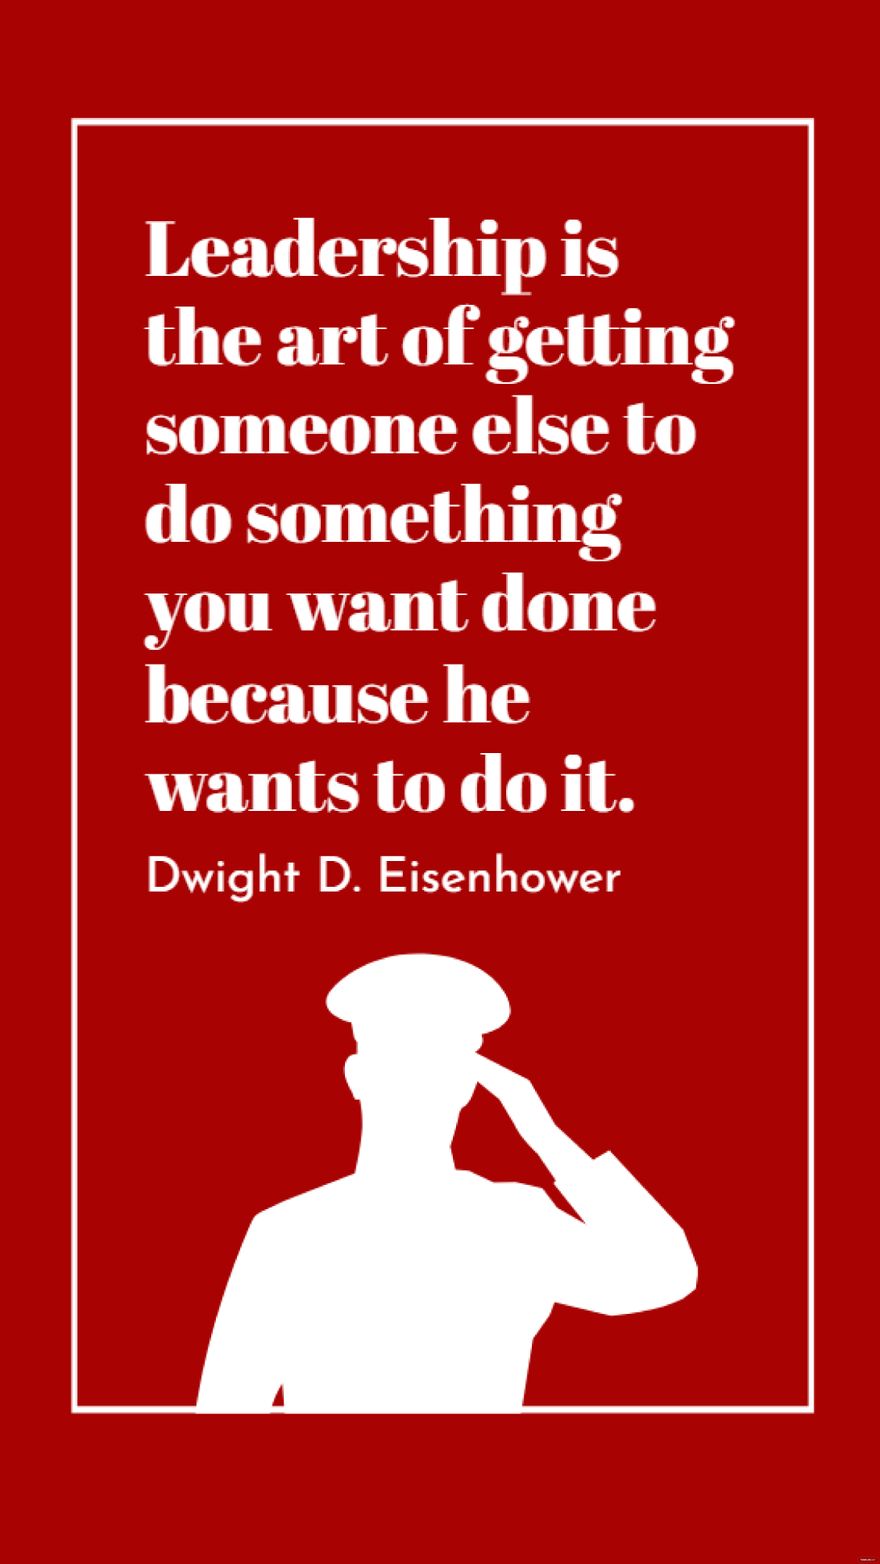 Dwight D. Eisenhower - Leadership is the art of getting someone else to do something you want done because he wants to do it.